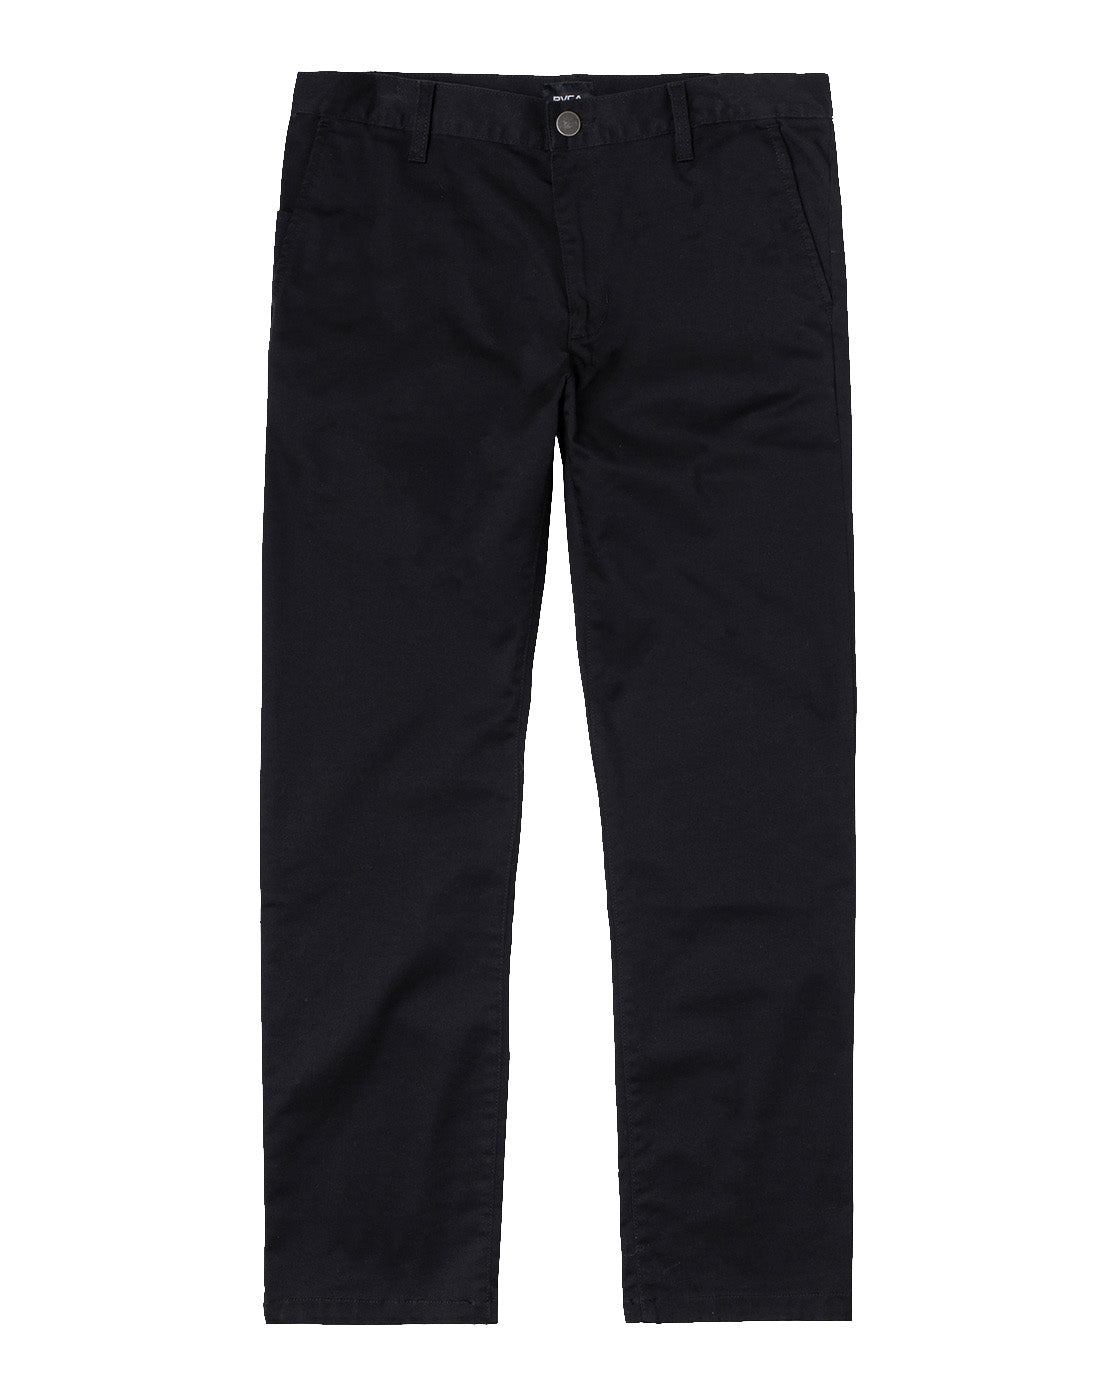 RVCA The Weekend Stretch Pant BLK 32